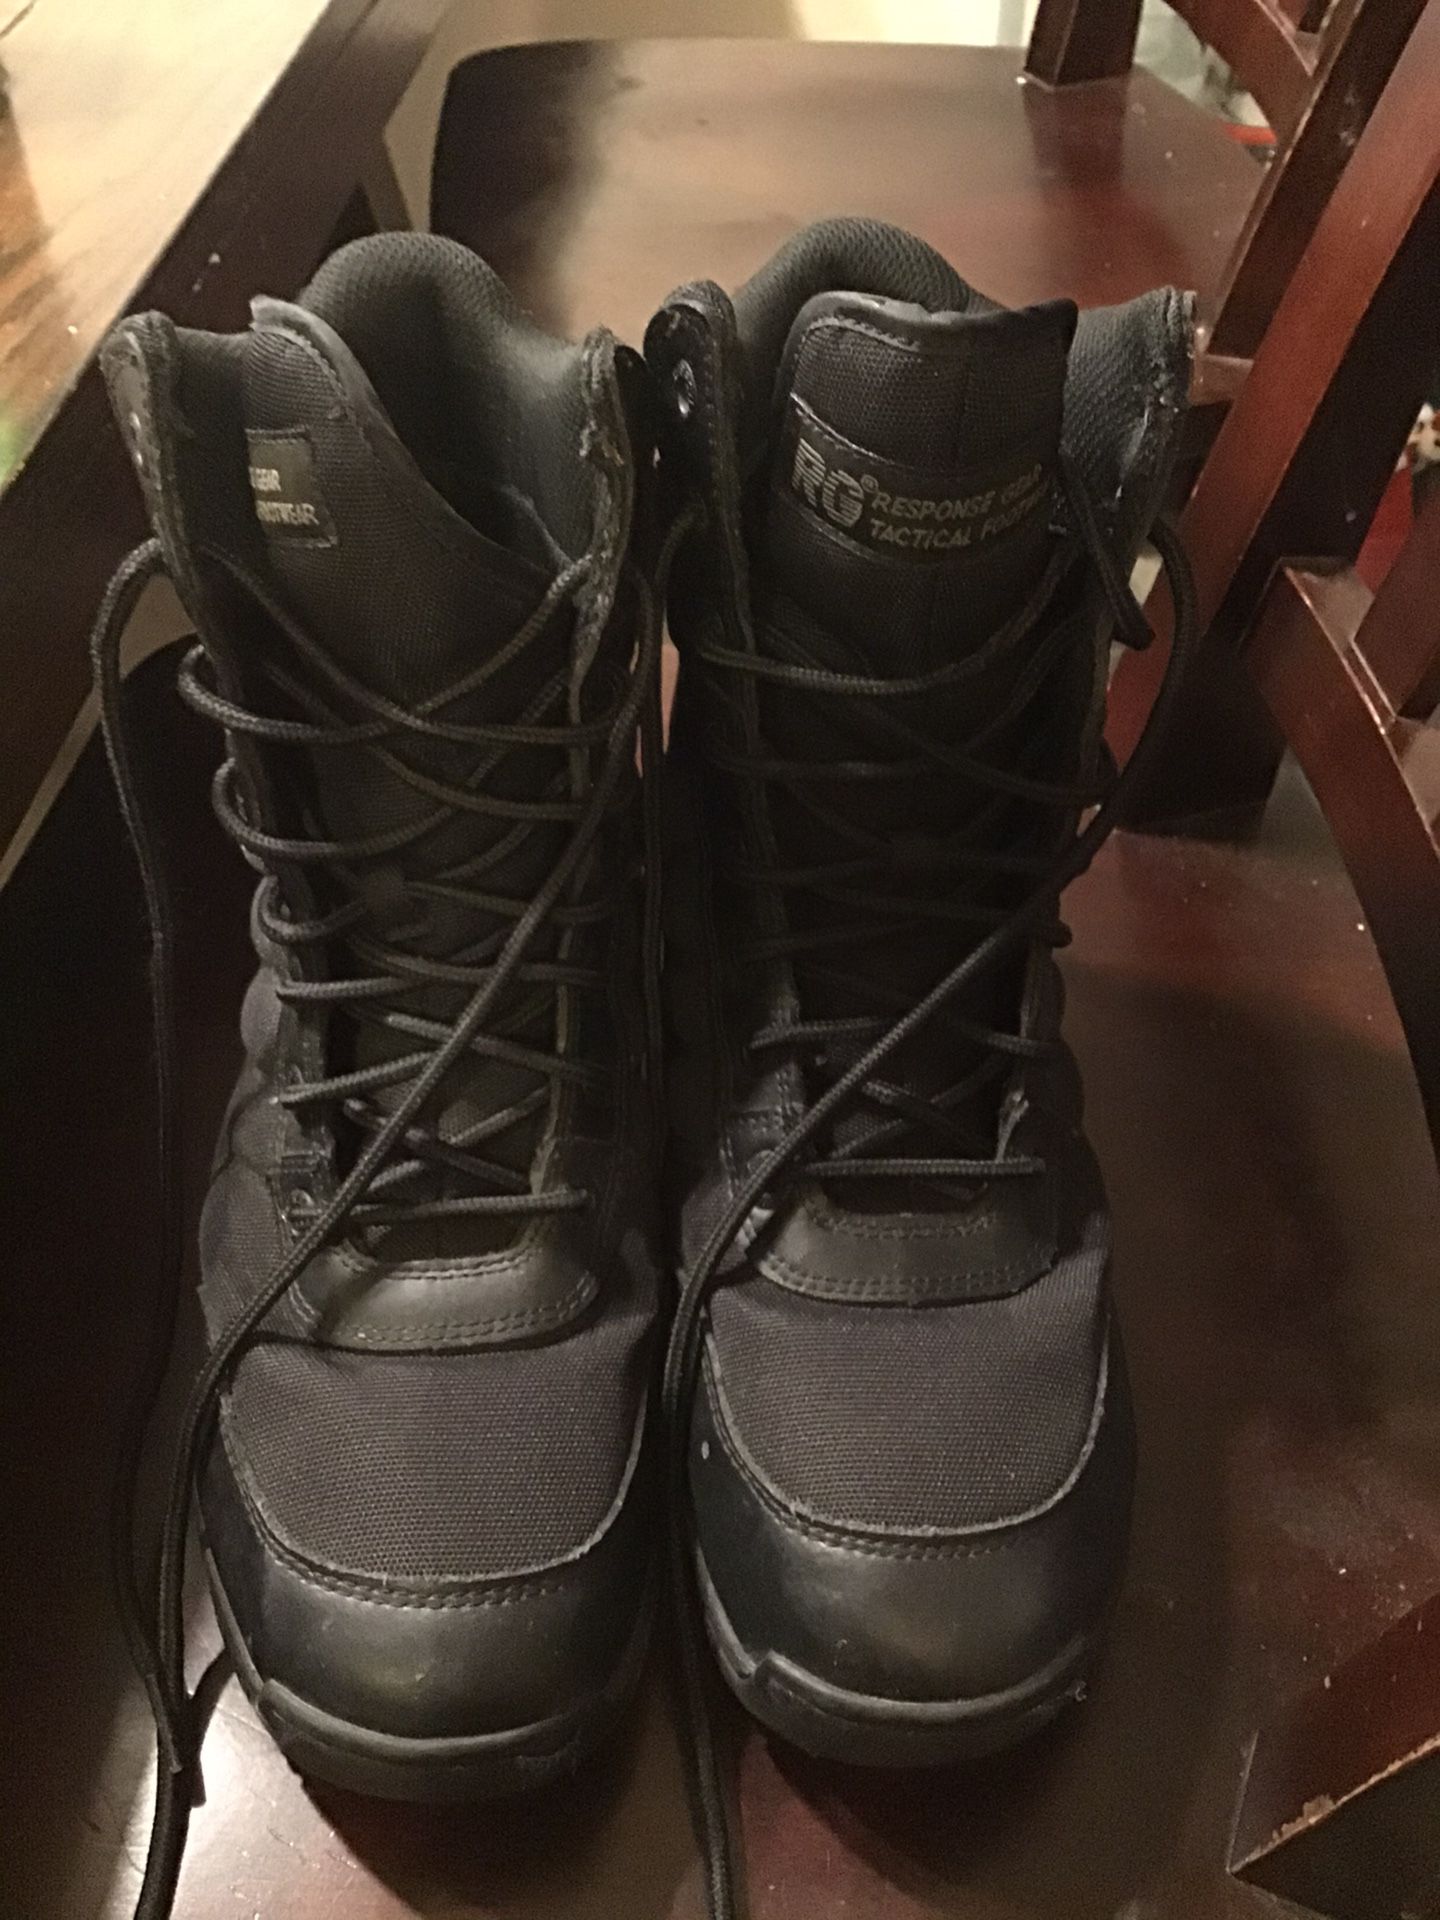 Boots $10 size 9 for men not steel toe